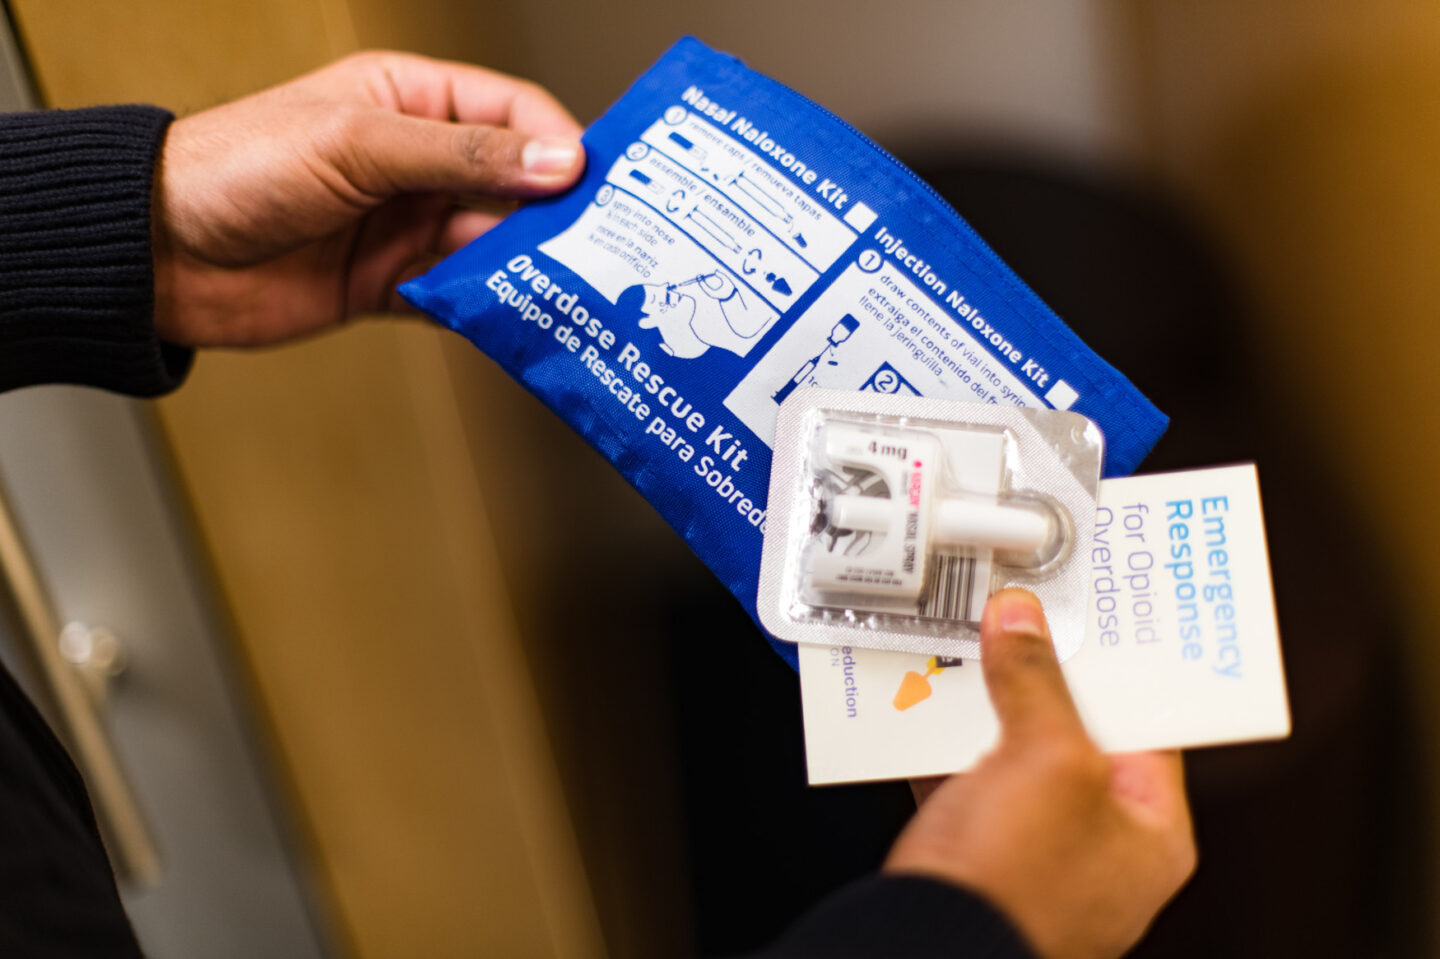 Close-up of hands holding a pouch with naloxone nasal spray